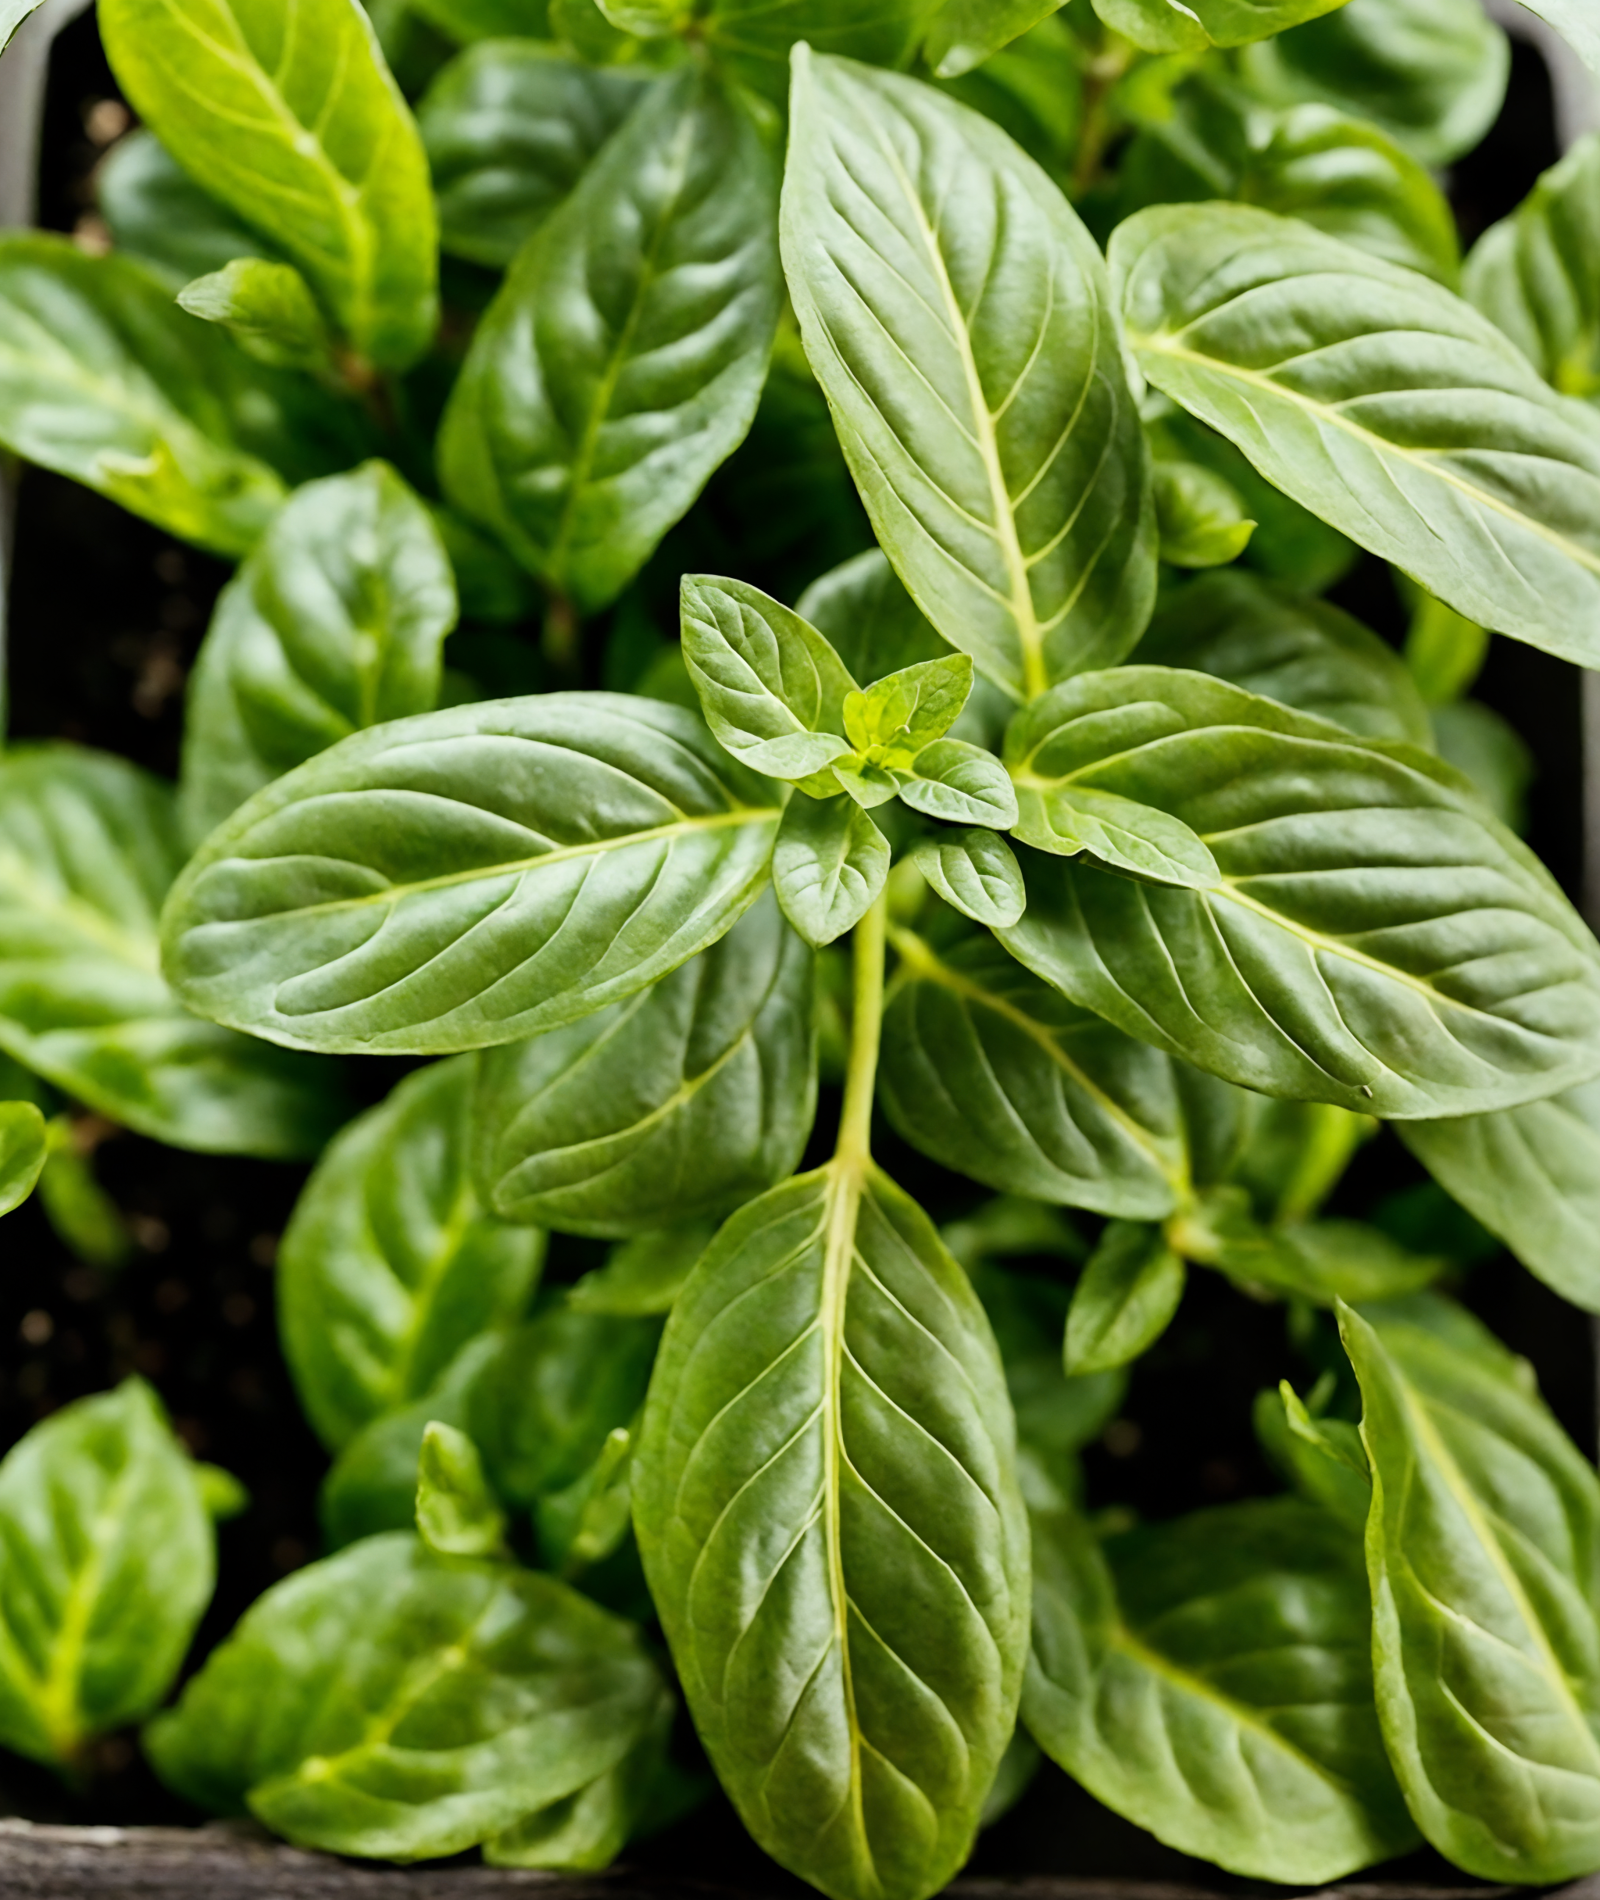 Potted Ocimum basilicum (basil) with vibrant leaves, clear lighting, against a dark background.